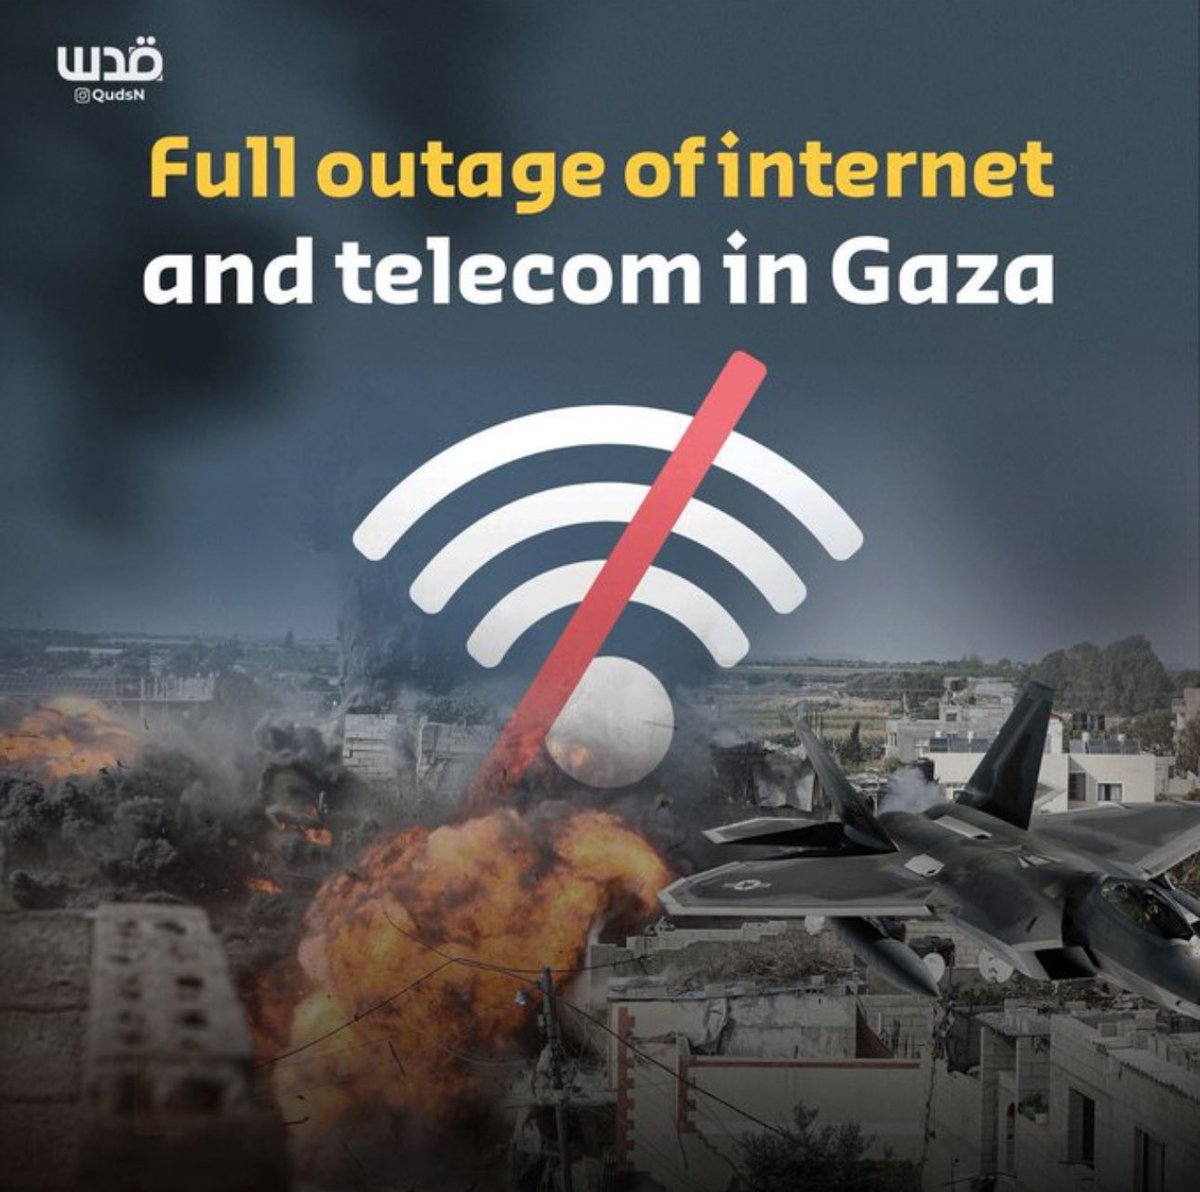 FULL TELECOMUNICATION BLACKOUT IN GAZA

Israel is committing War crimes in the darkness

ALL EYES ON RAFAH